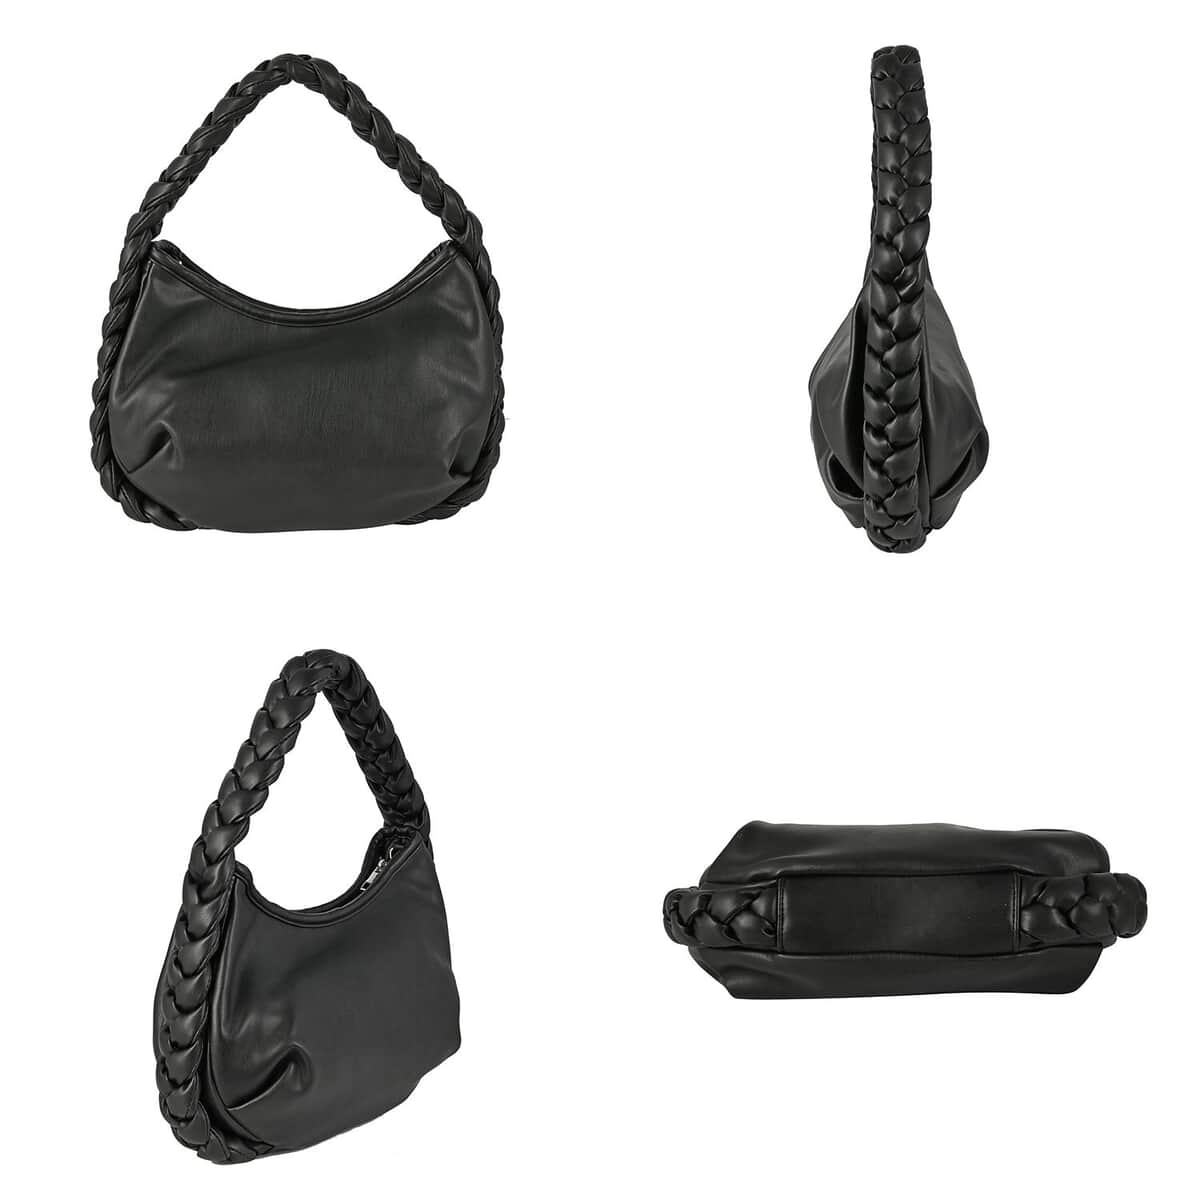 Designer Closeout Collection 18 Black Braided Handle Vegan Leather Hobo Bag (10x7.5x2.3”) with Adjustable Long Strap (51”) image number 6